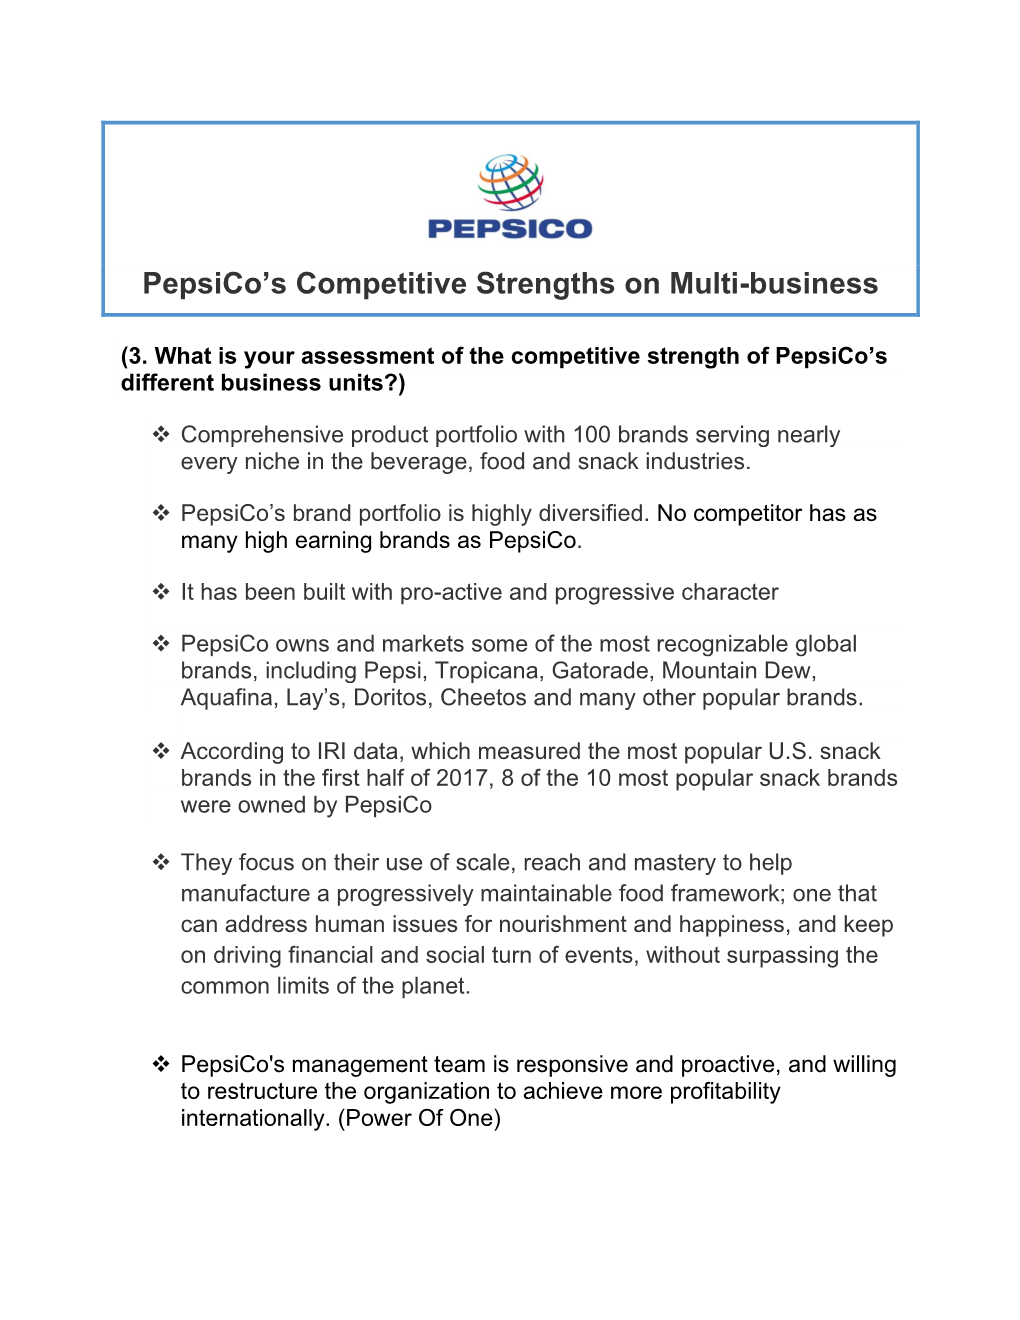 Pepsico's Competitive Strengths on Multi-Business